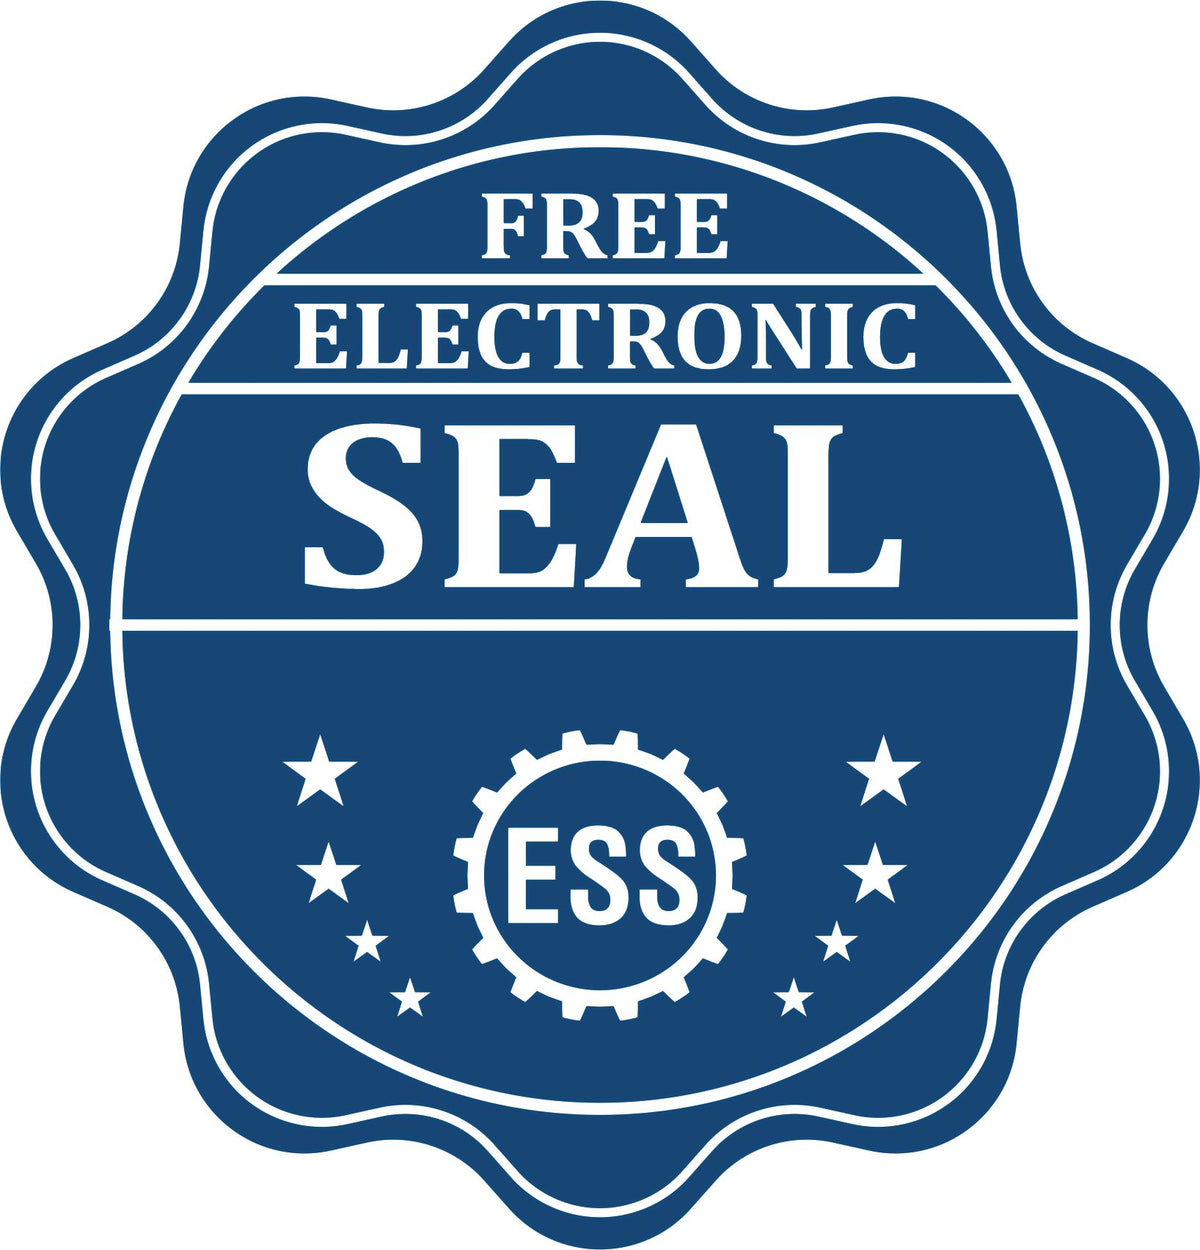 A badge showing a free electronic seal for the MaxLight Premium Pre-Inked Alabama State Seal Notarial Stamp with stars and the ESS gear on the emblem.